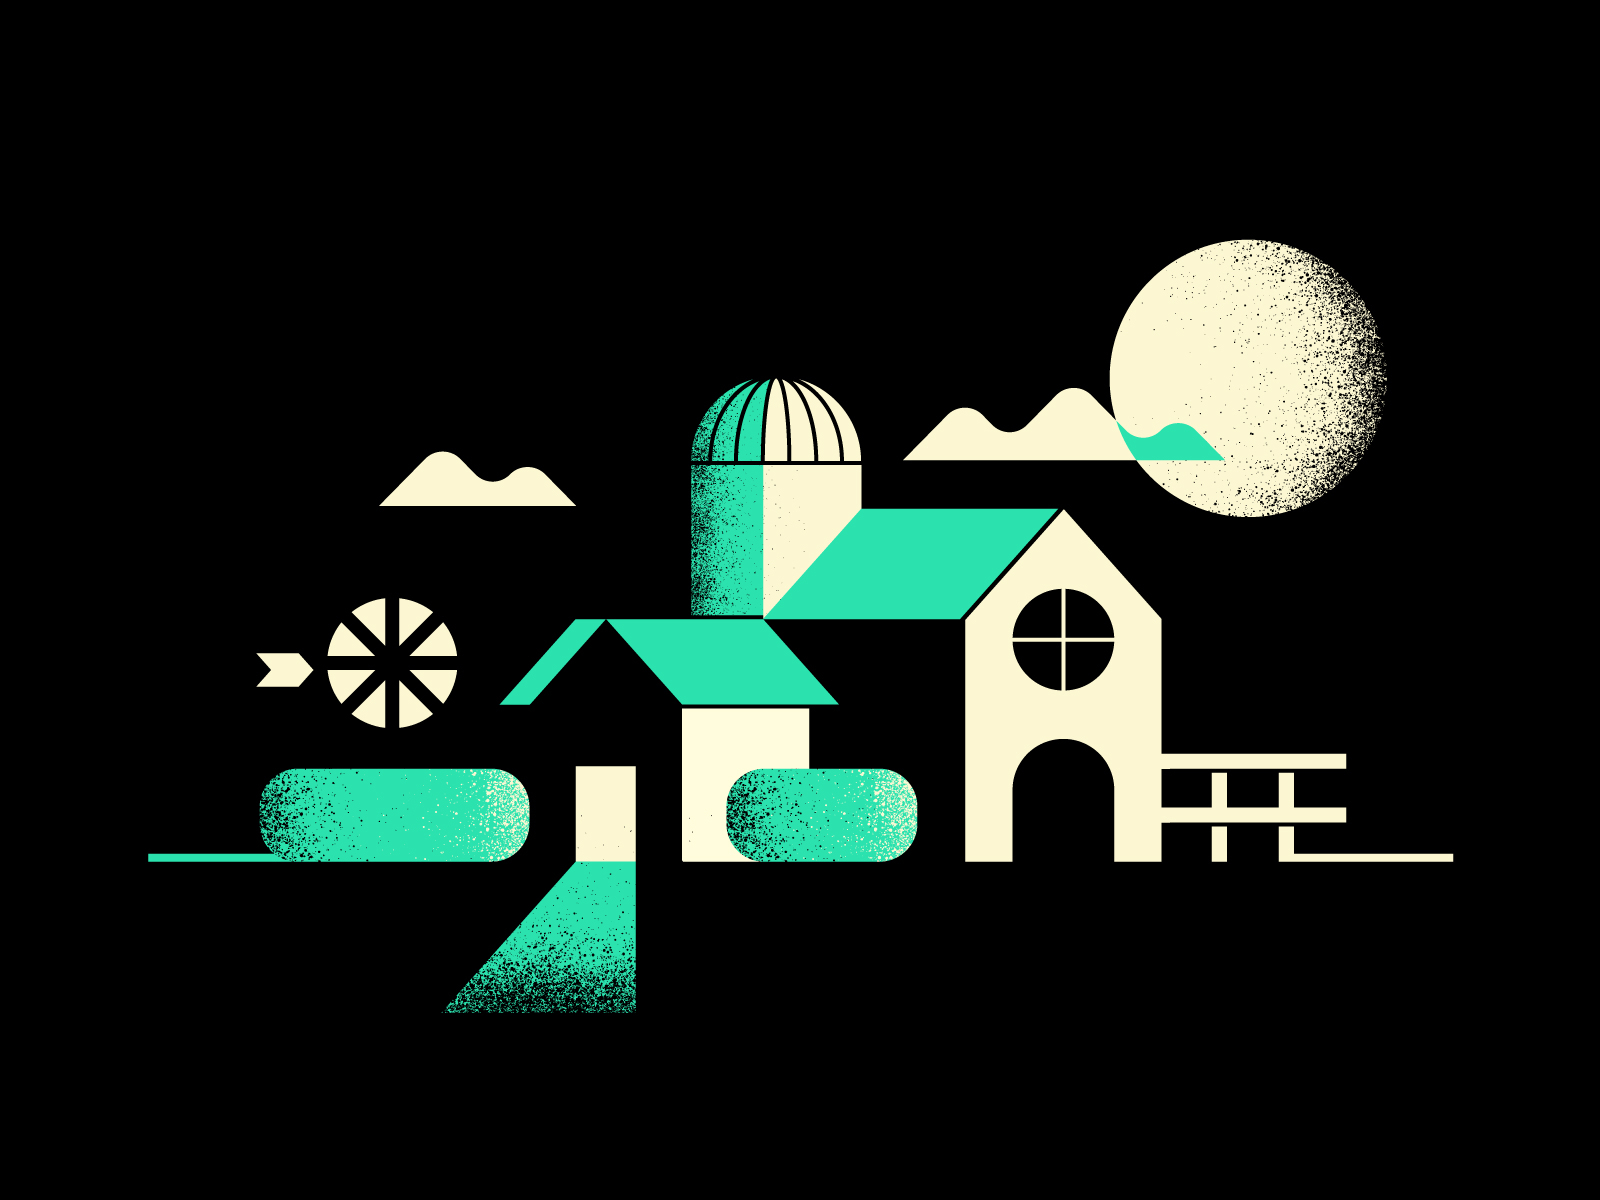 Farmhouse by Nathan Holthus on Dribbble